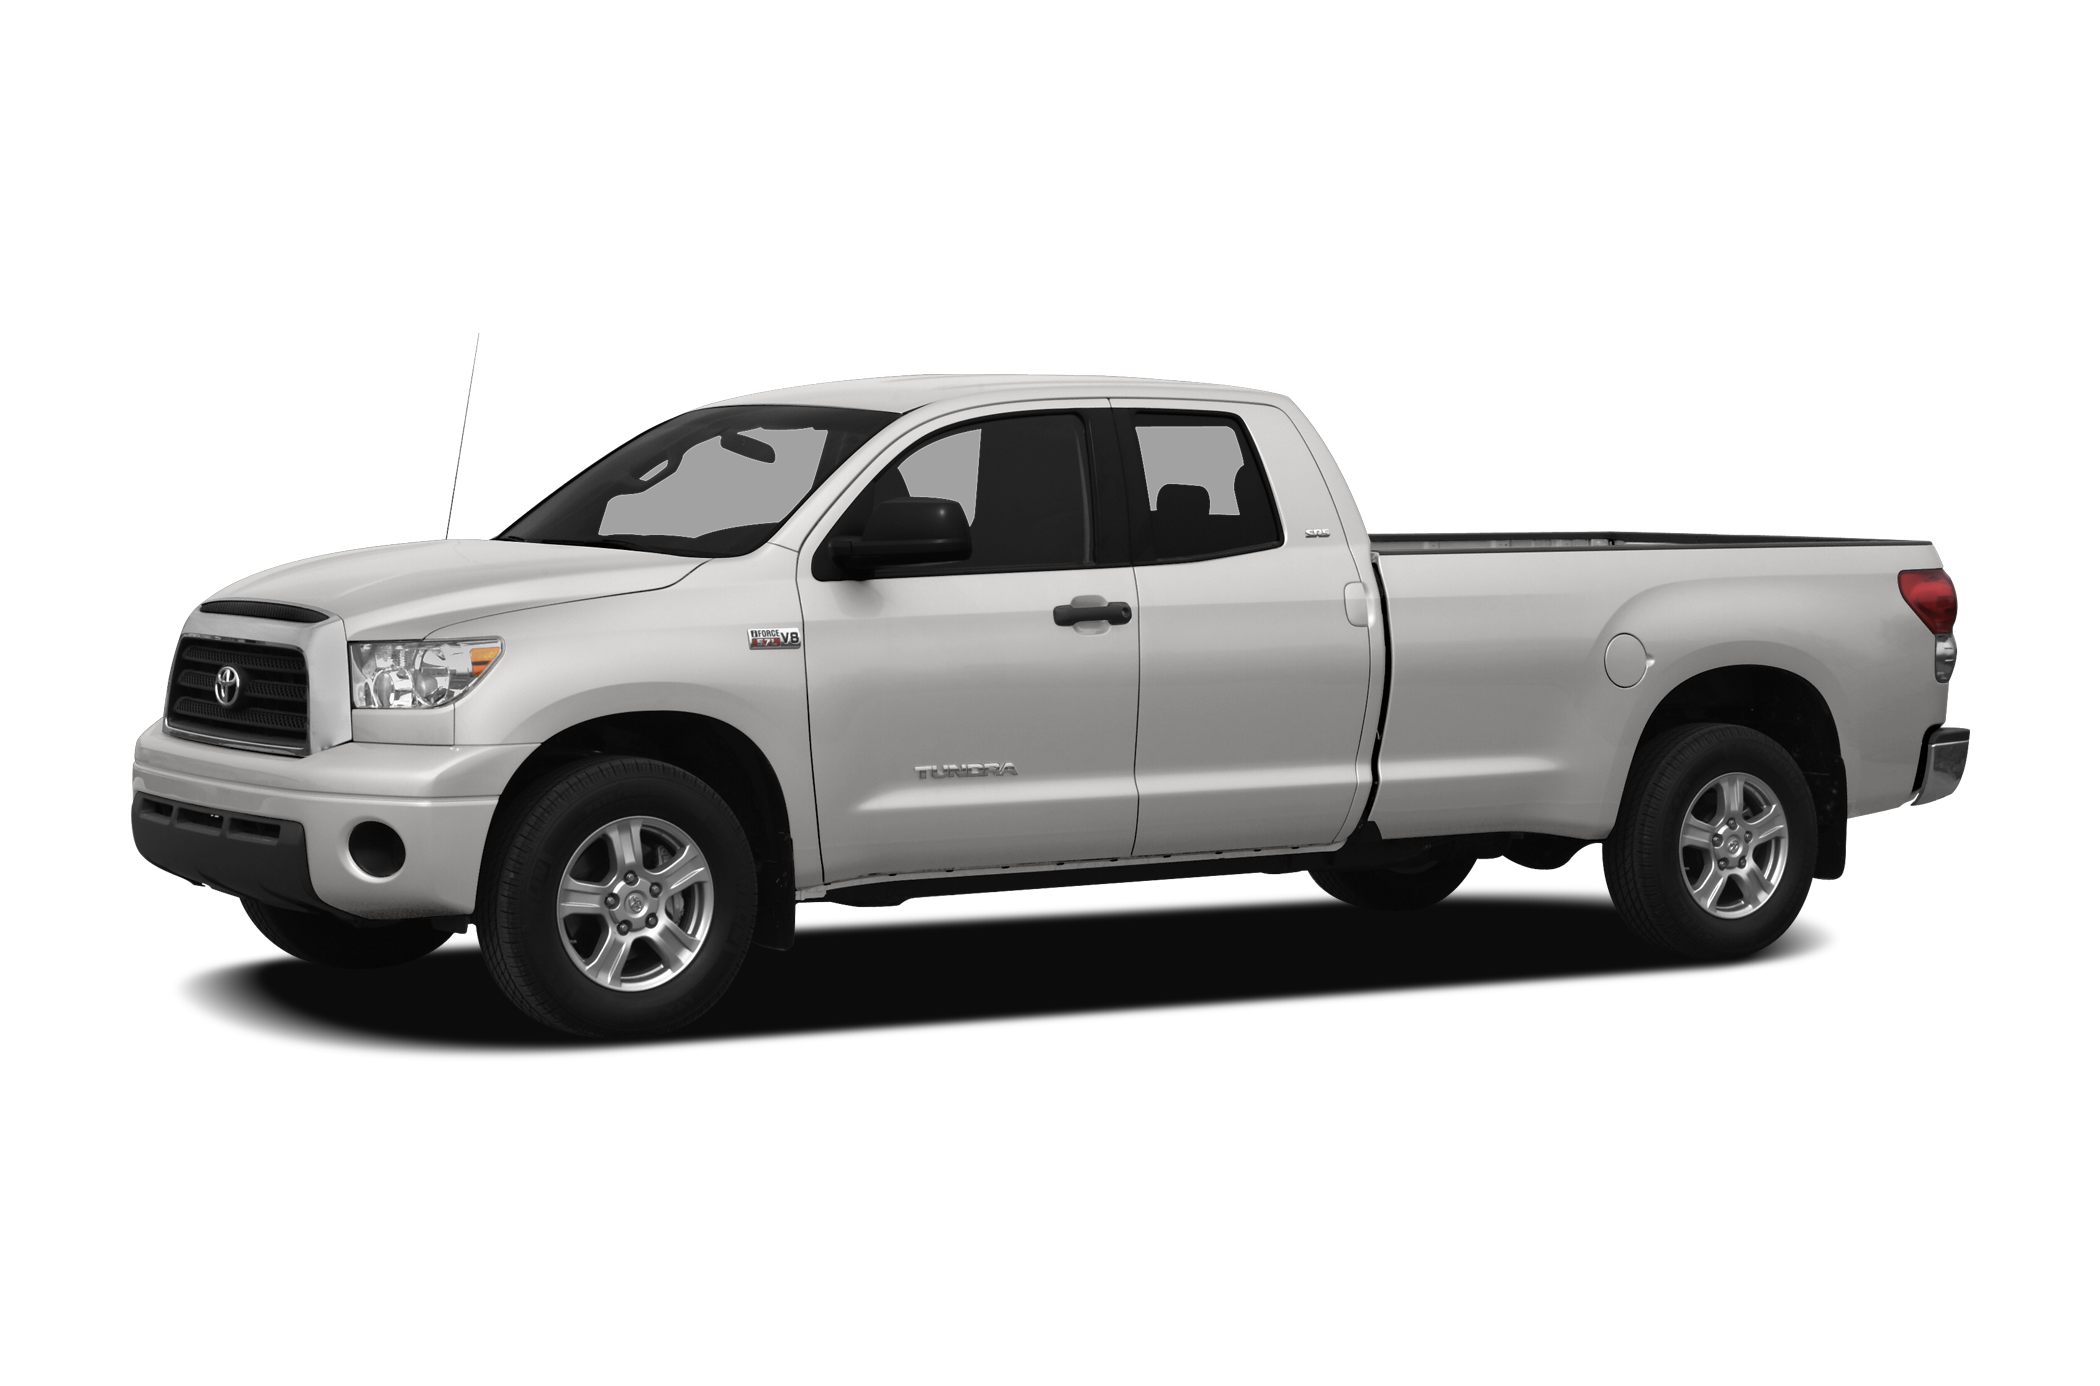 2008 toyota tundra for sale seattle #3